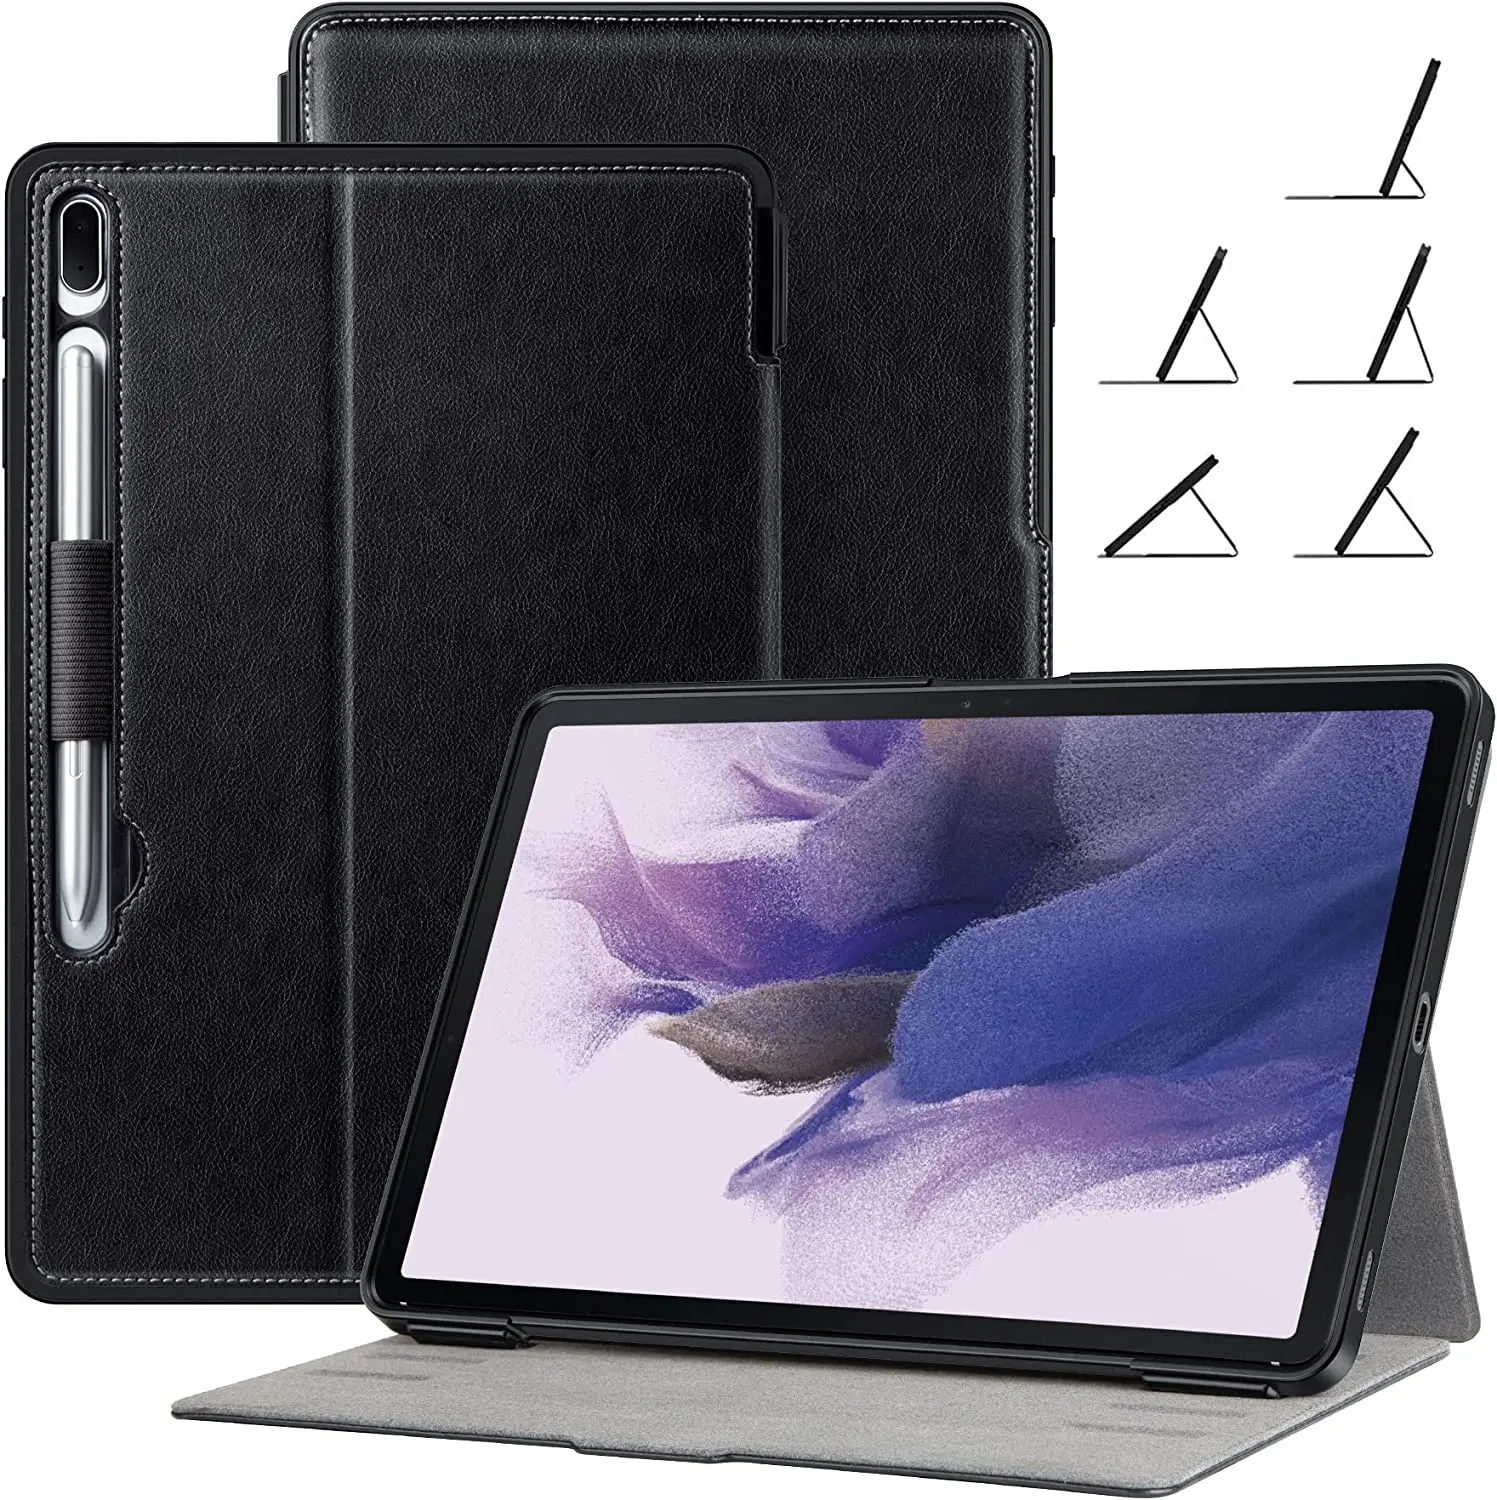 Galaxy Tab S8 Plus/S7 FE/S7 Premium Leather Folio Case with 5 Magnetic Stand Angles